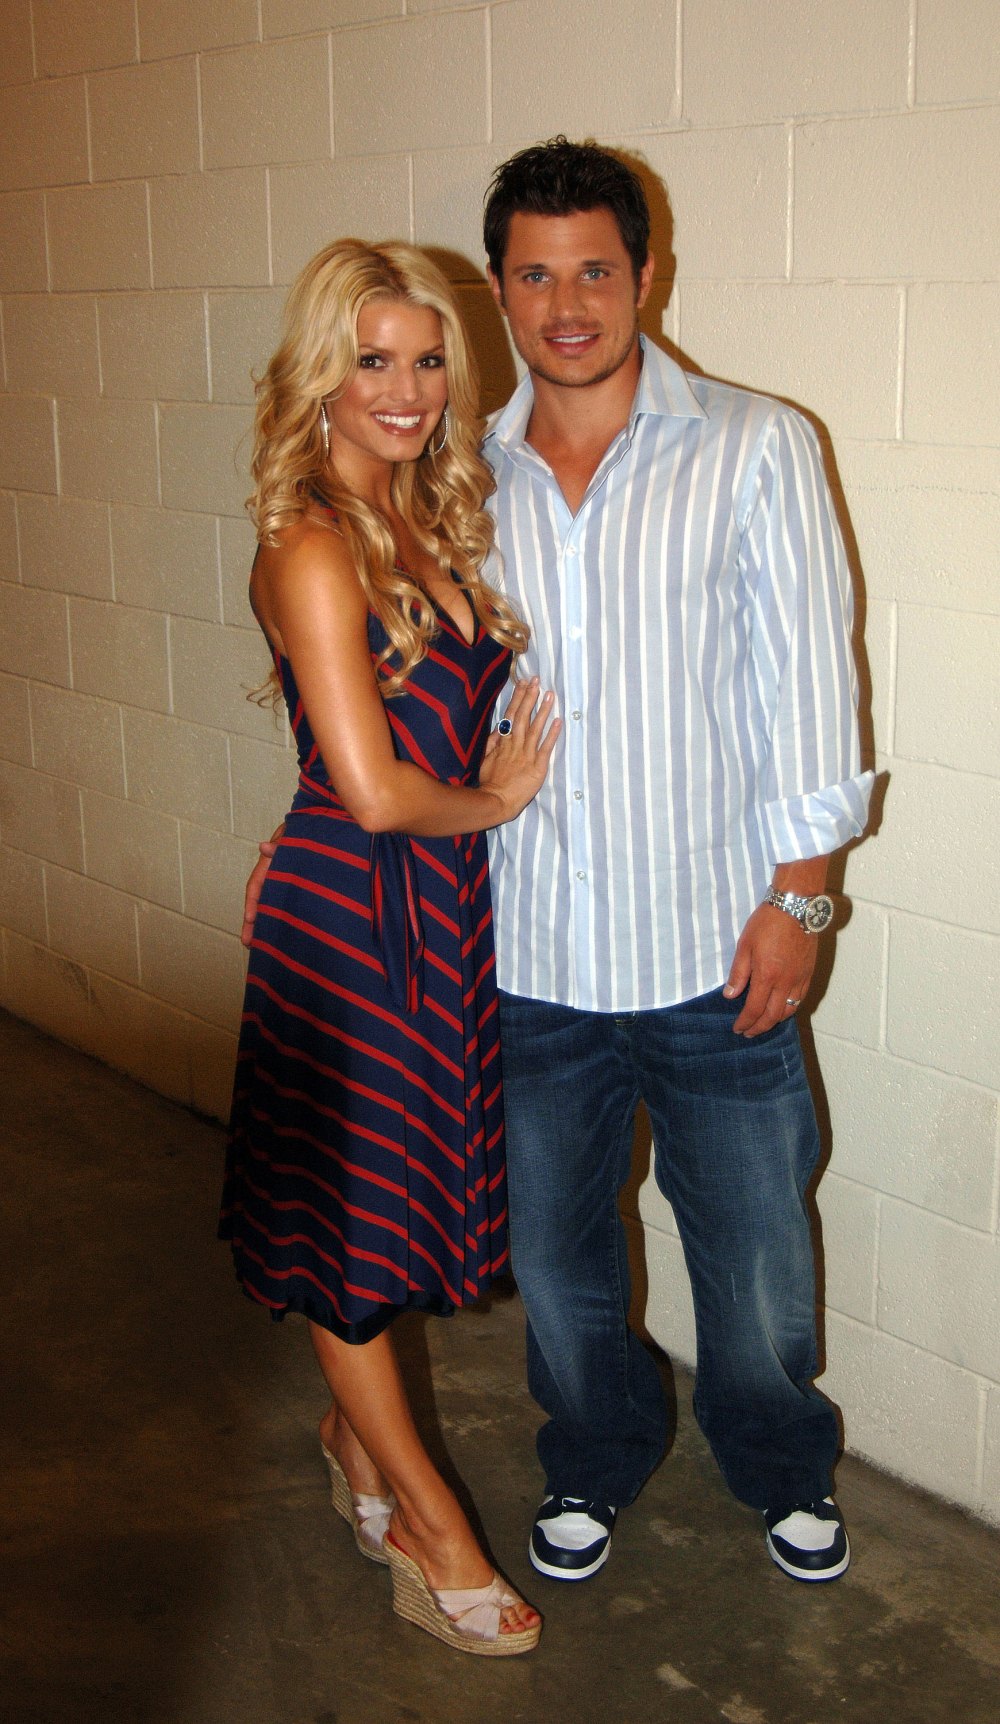 Jessica Simpson and Nick Lachey Pre-Game Performance at FedEx Field